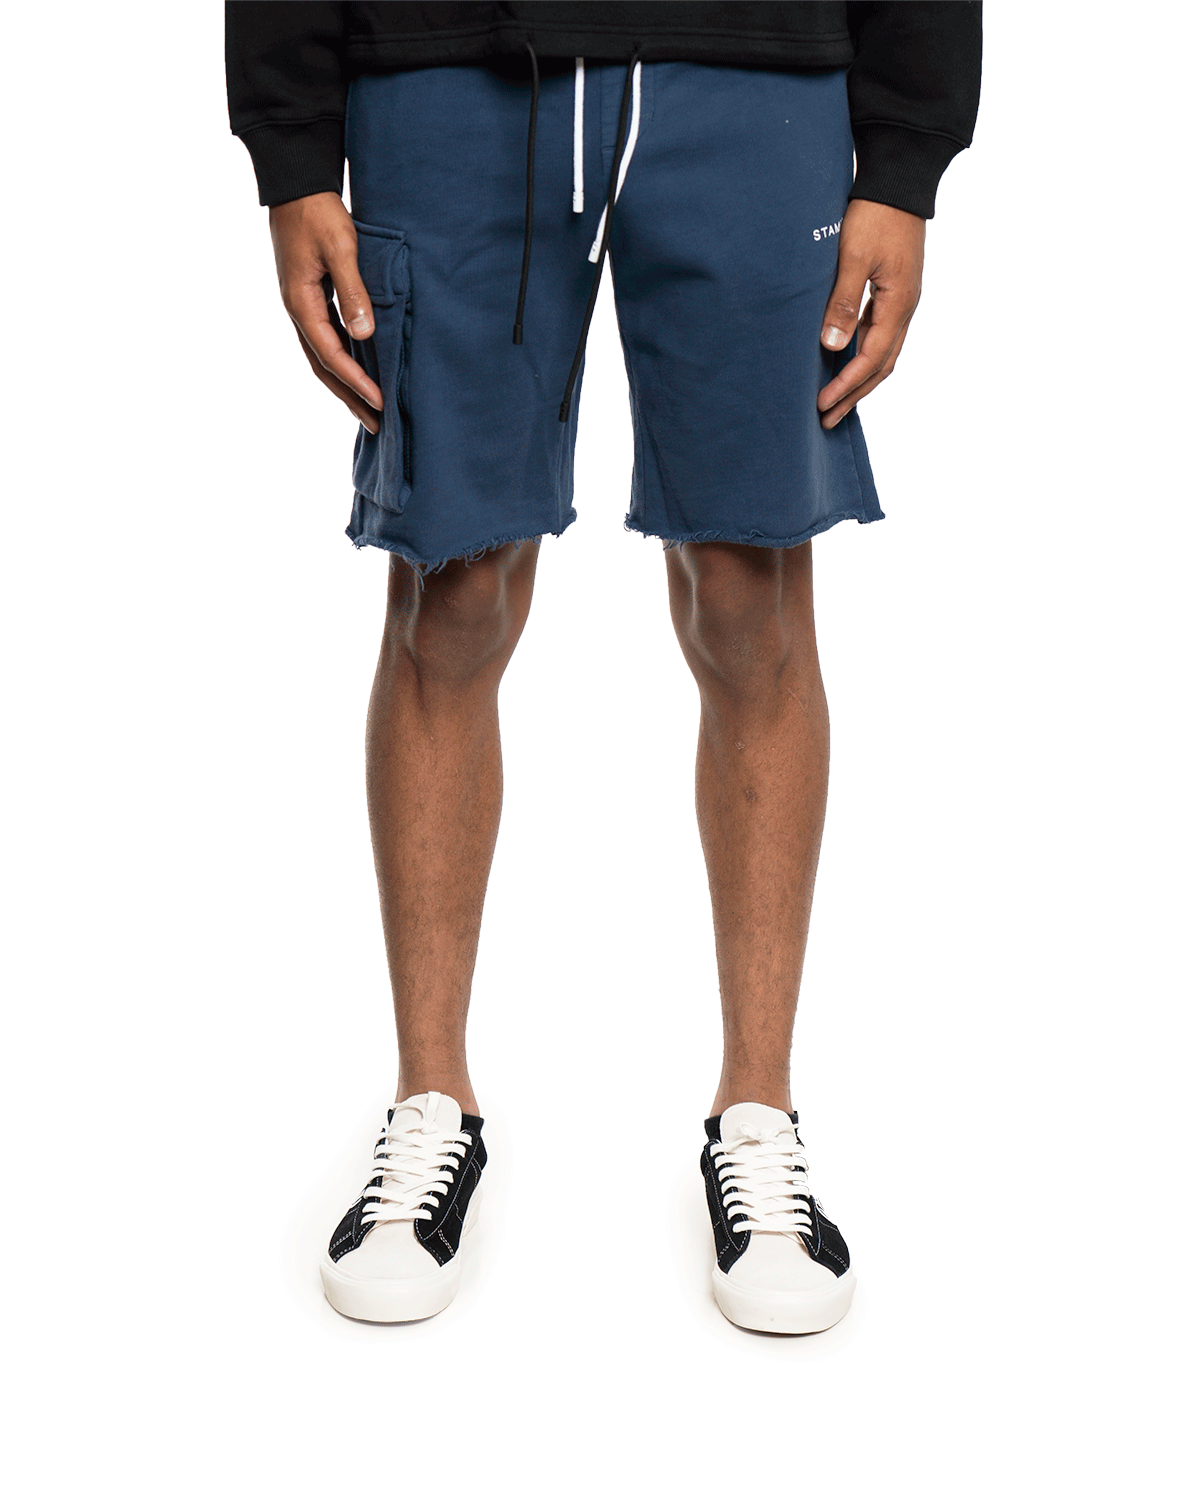 Stampd Classic Logo Sweat Shorts Navy